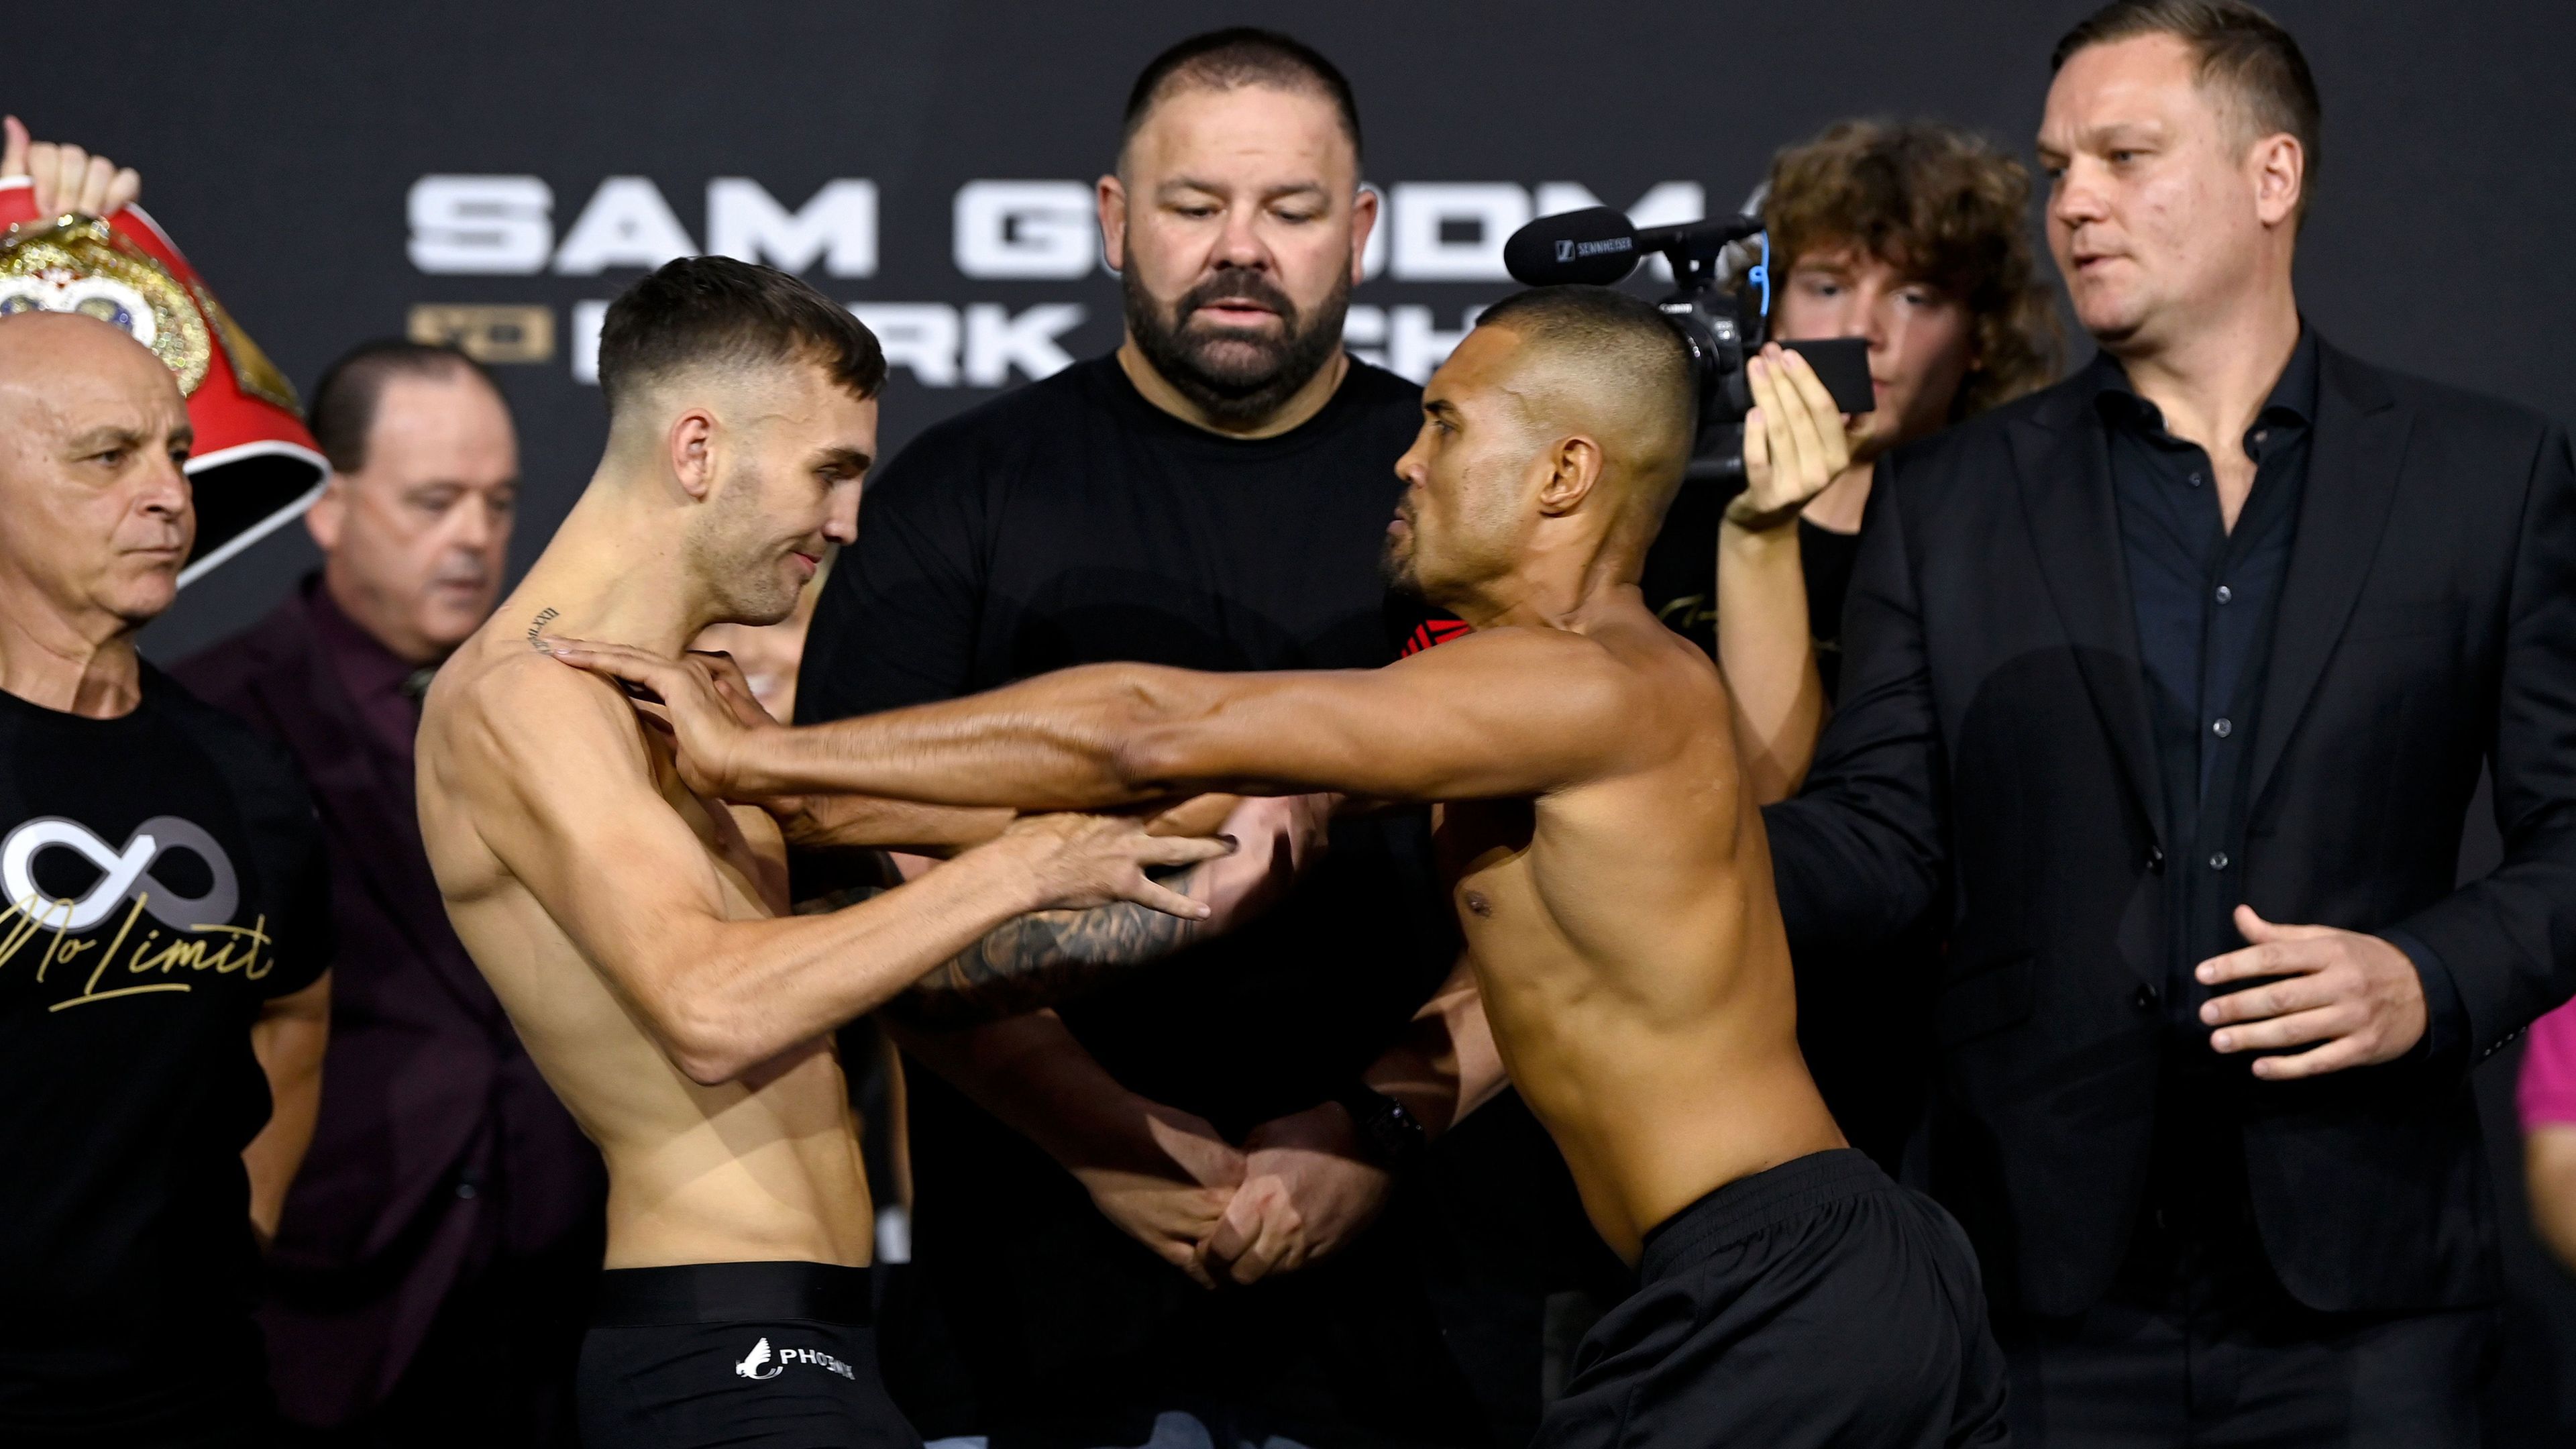 'Scumbags': Mark Schleibs and Sam Goodman's weigh-in turns physical after 'low blow' comments